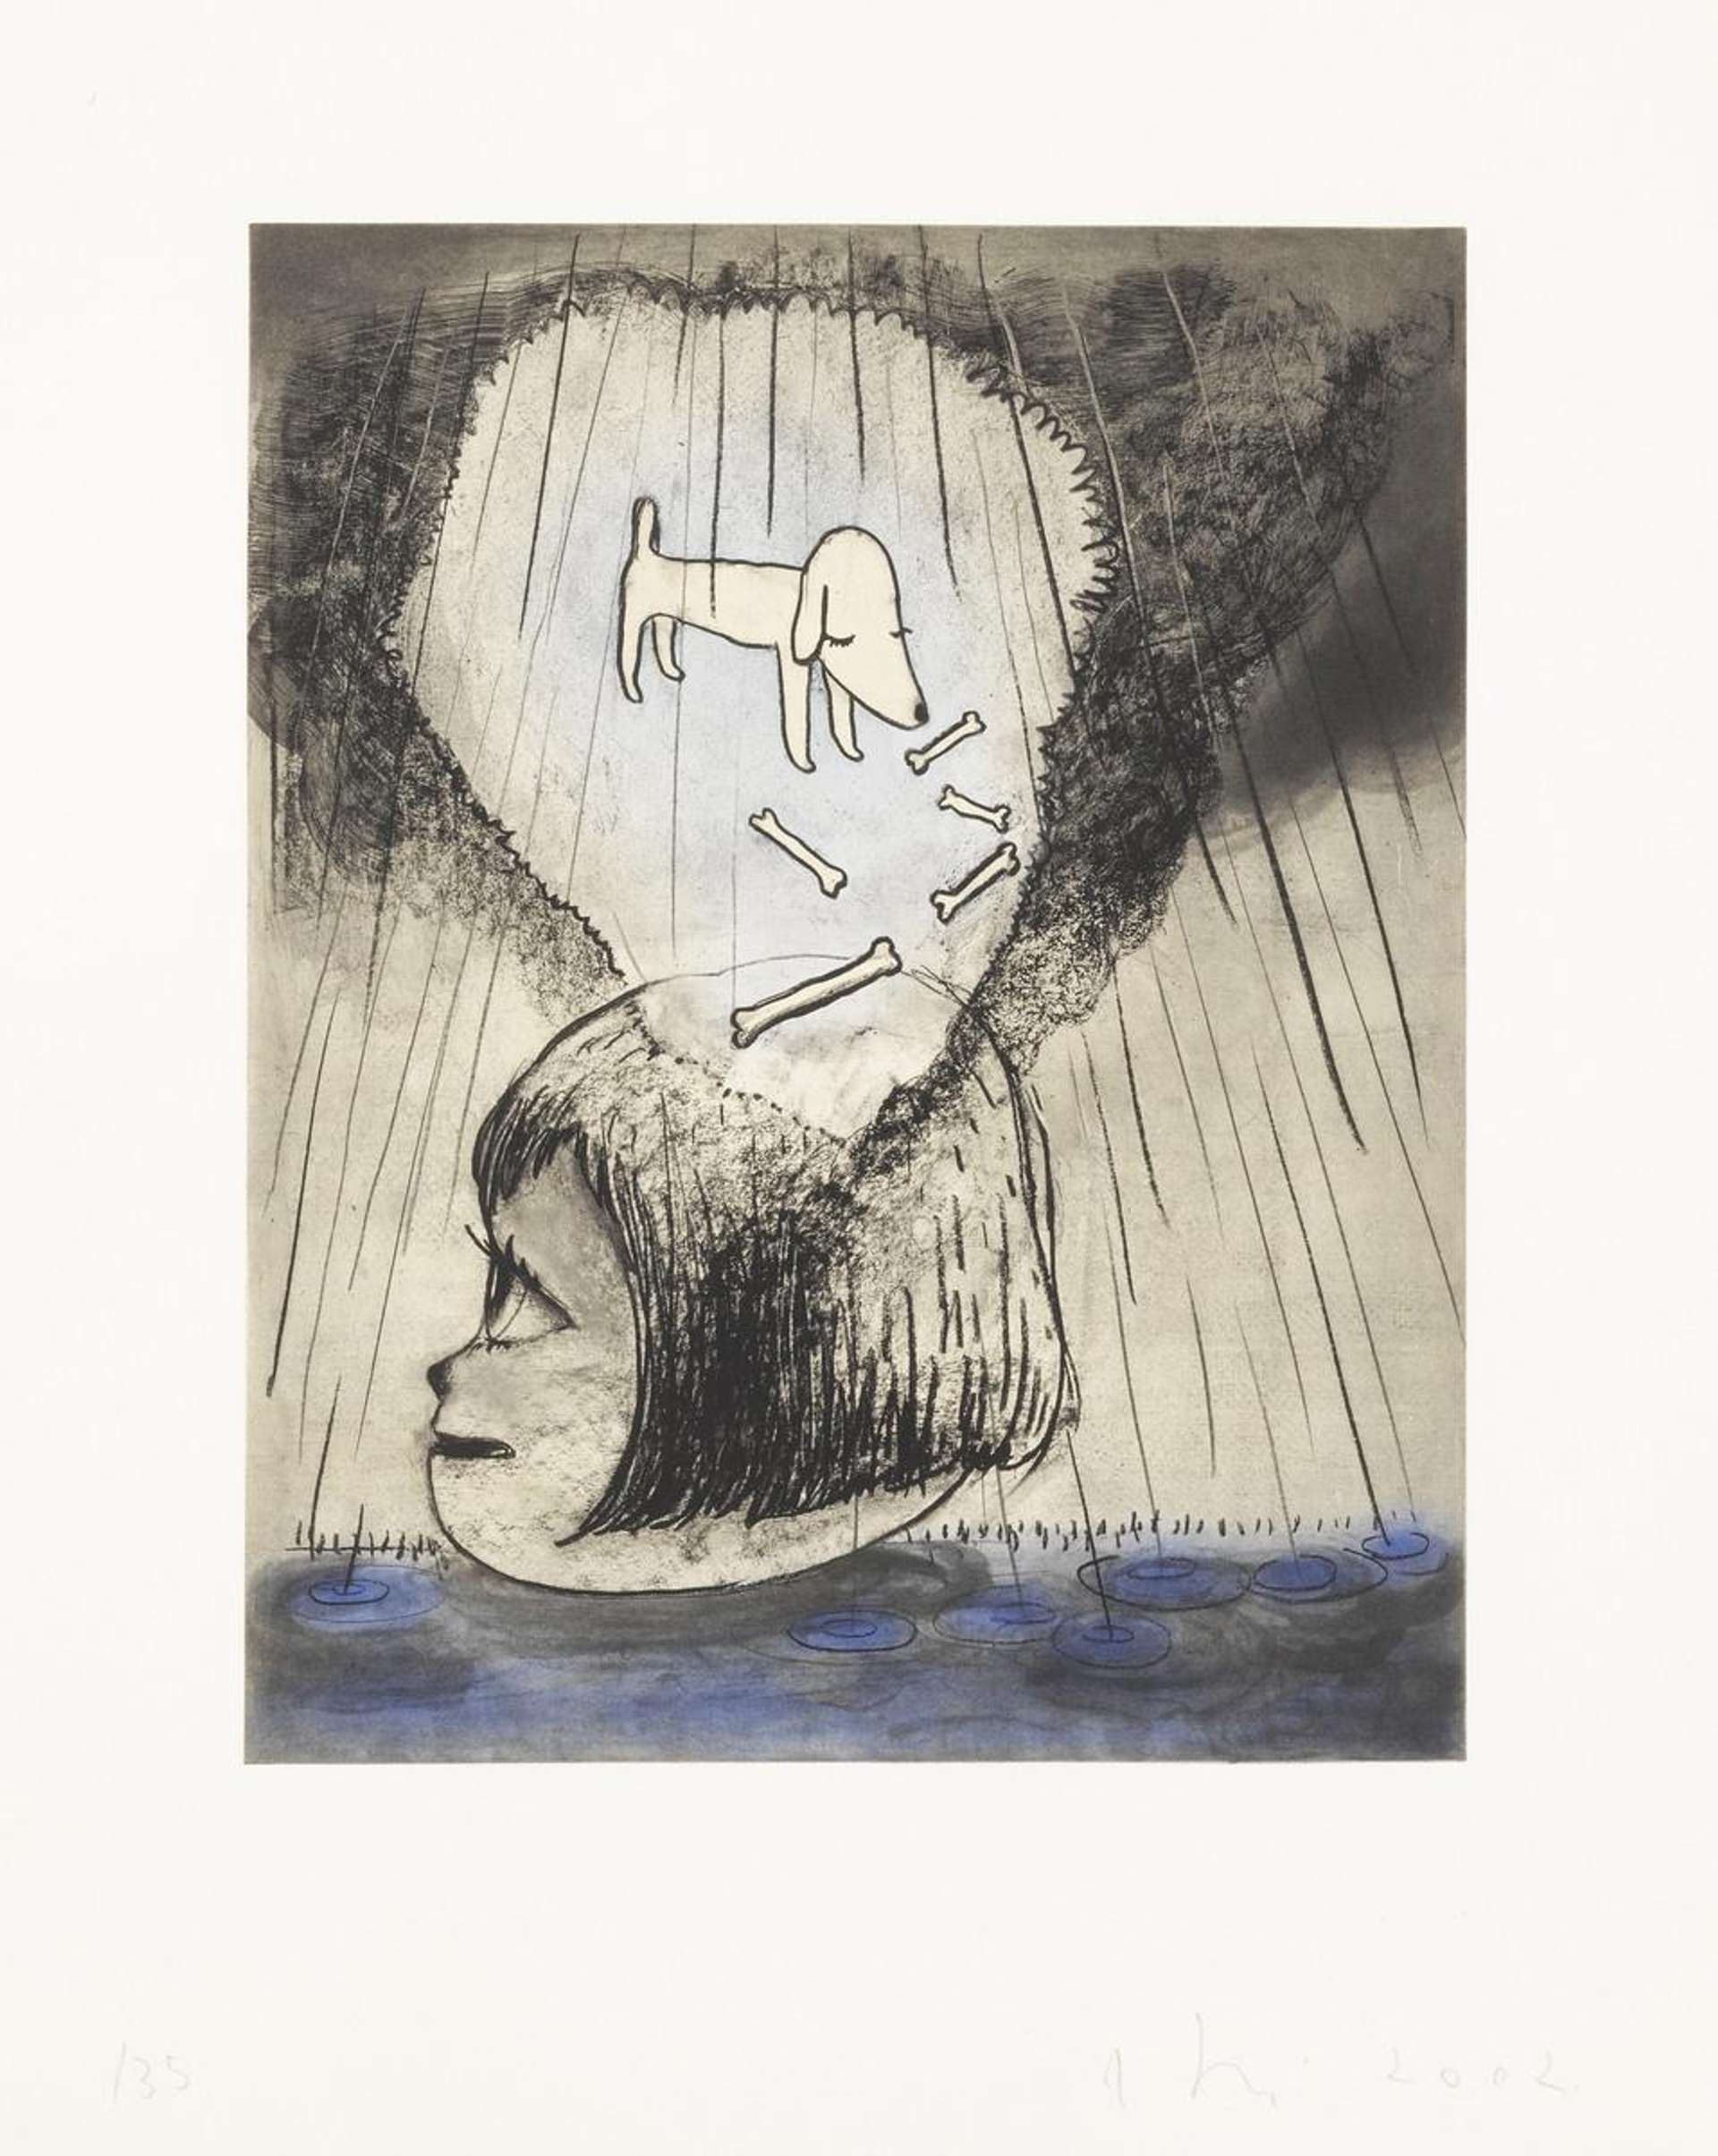 Yoshitomo Nara’s Rainy Day print, showing a large head in water, with a thought bubble and rain.